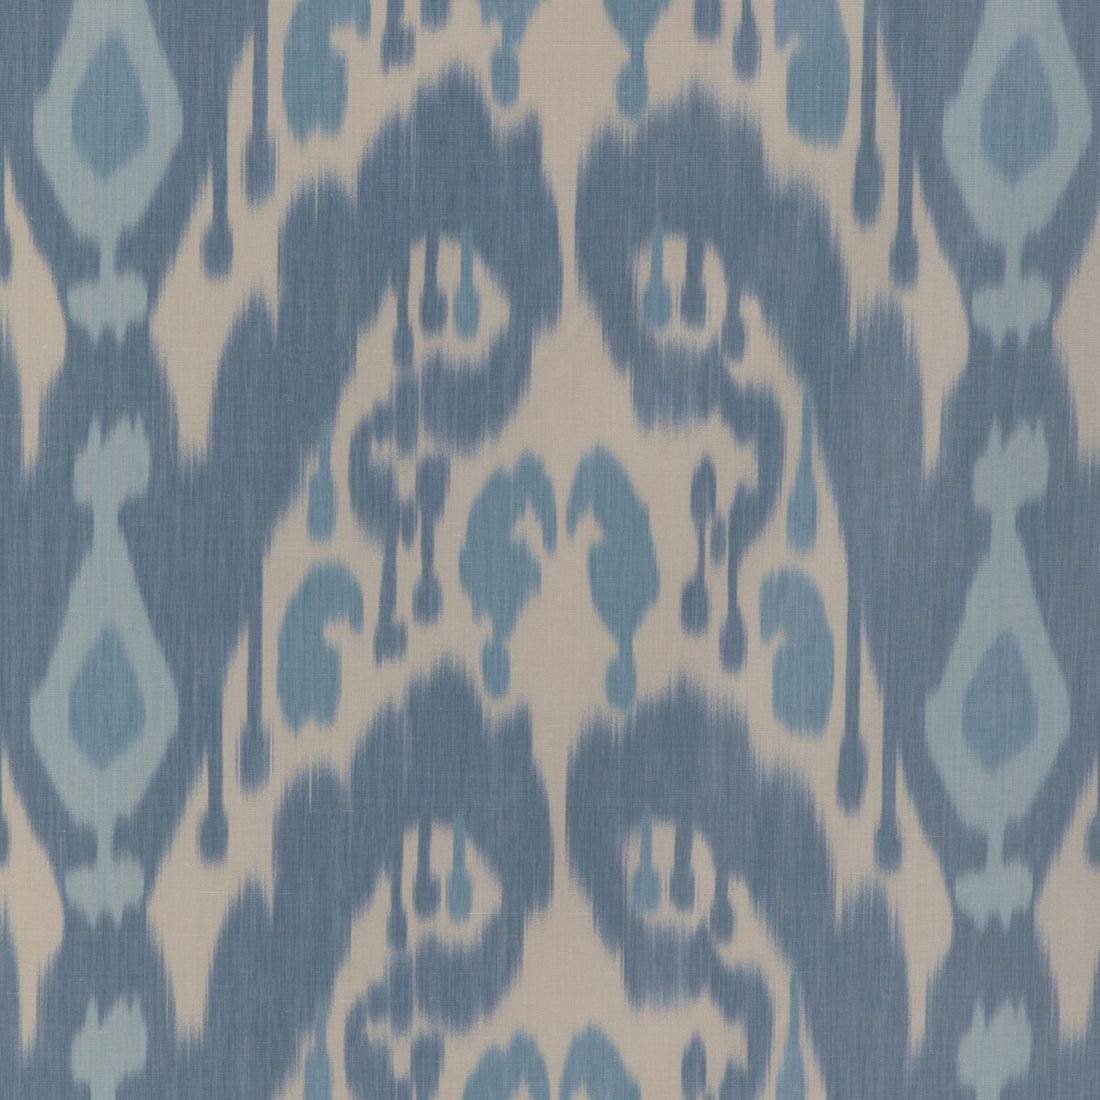 Bukara Warp Print fabric in blue color - pattern 8023146.155.0 - by Brunschwig &amp; Fils in the Vienne Silks collection